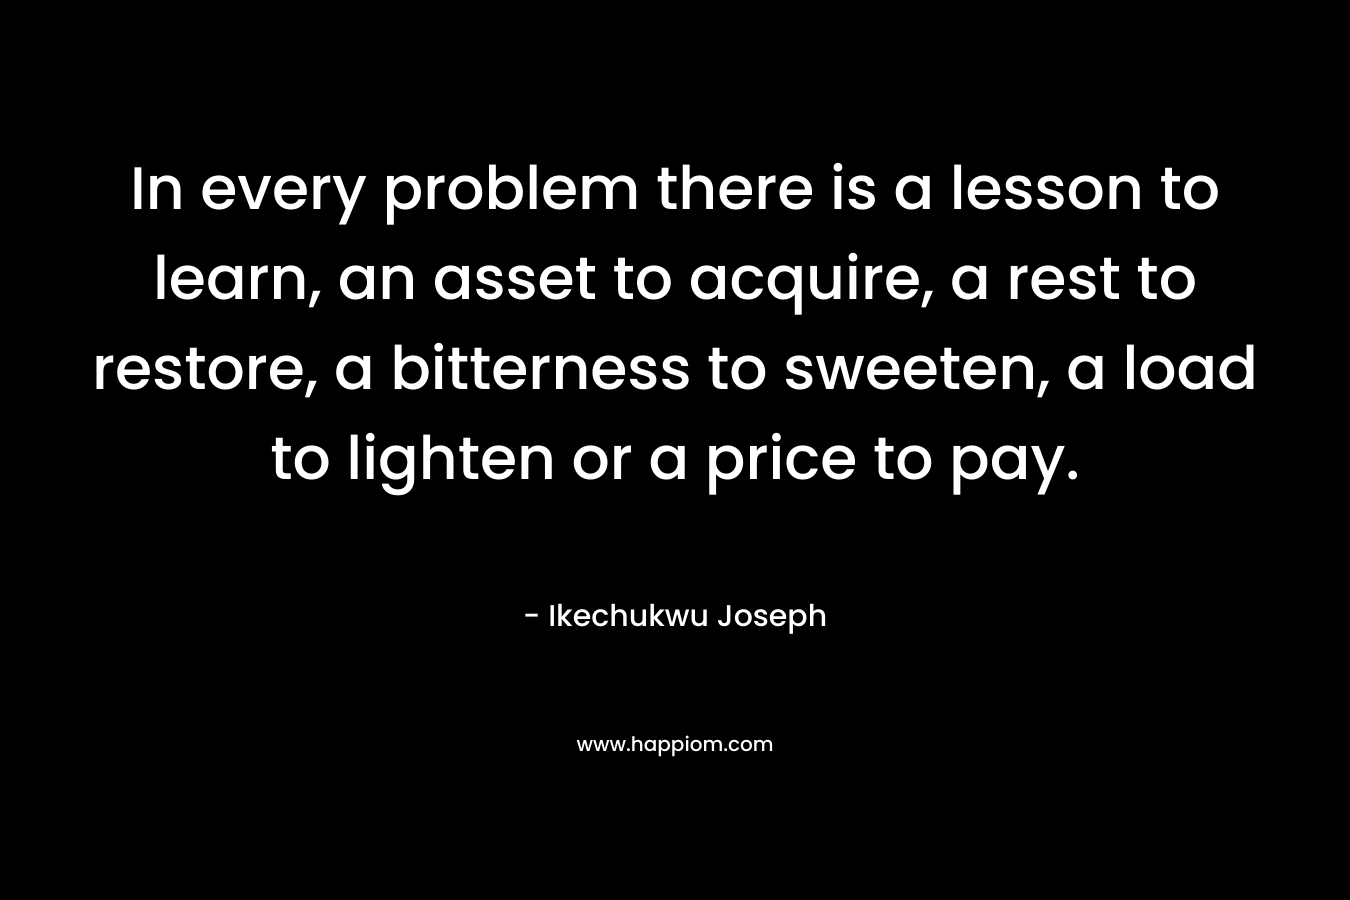 In every problem there is a lesson to learn, an asset to acquire, a rest to restore, a bitterness to sweeten, a load to lighten or a price to pay.